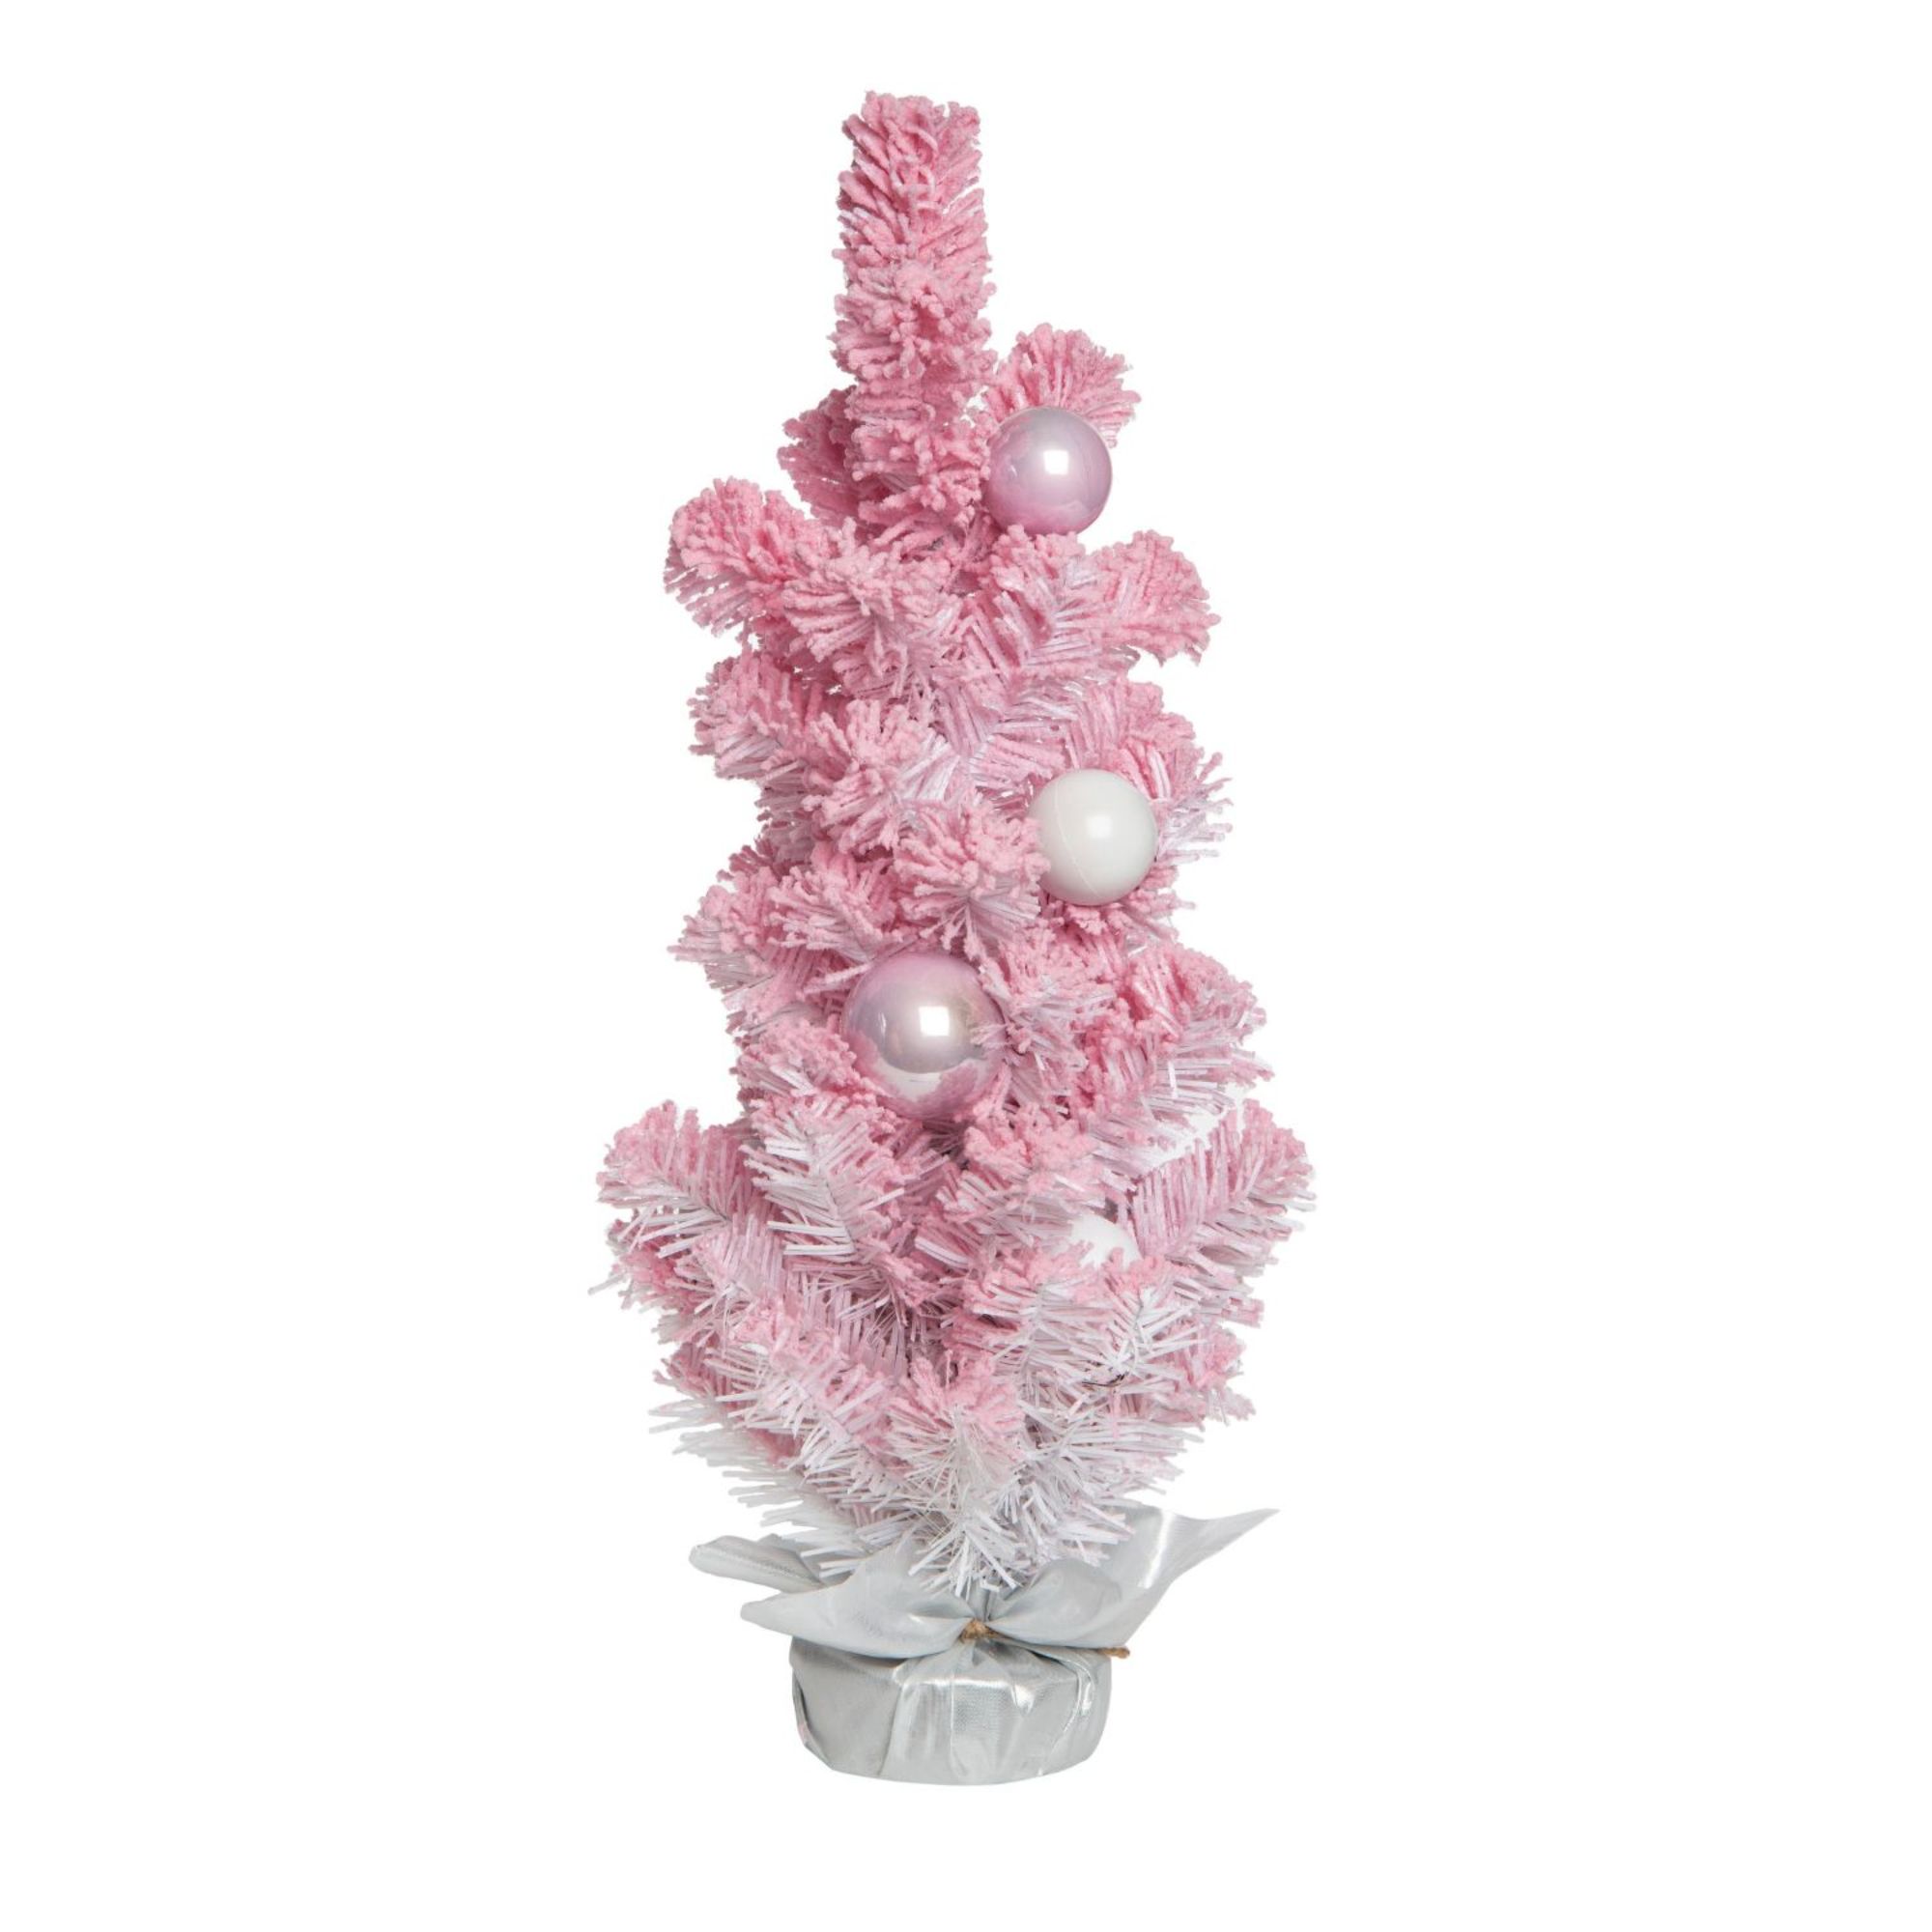 Contemporary Home Living 24" Potted Pink Artificial Medium Christmas Celebration Tree, Unlit